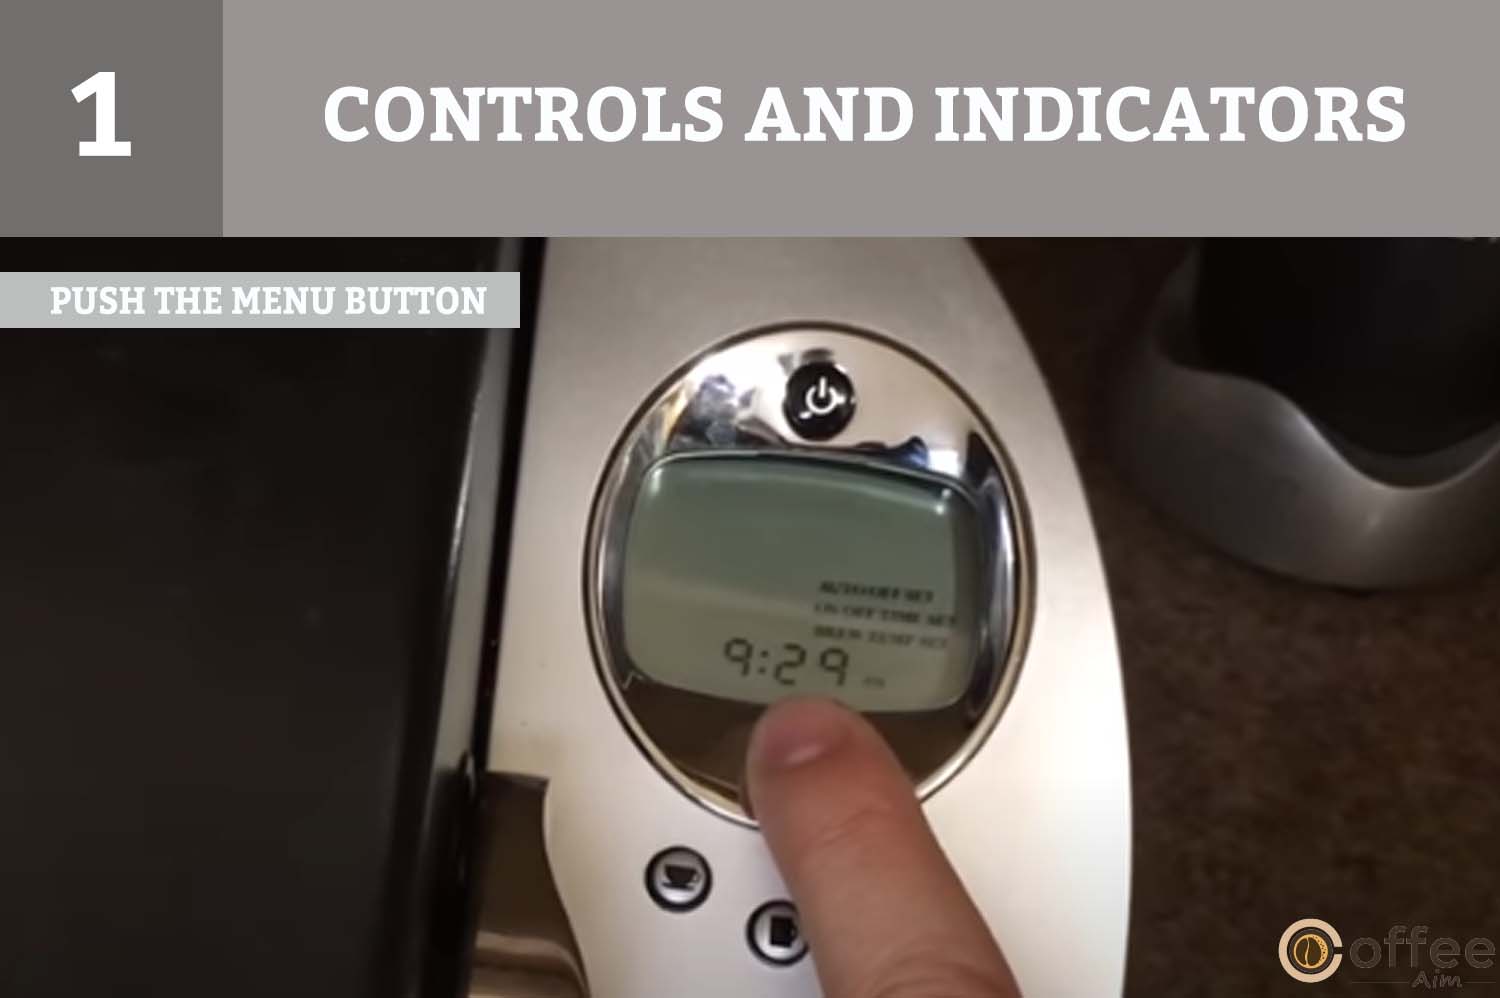 Press the Menu Button to access the various settings and functions on your Keurig B-60 brewer.